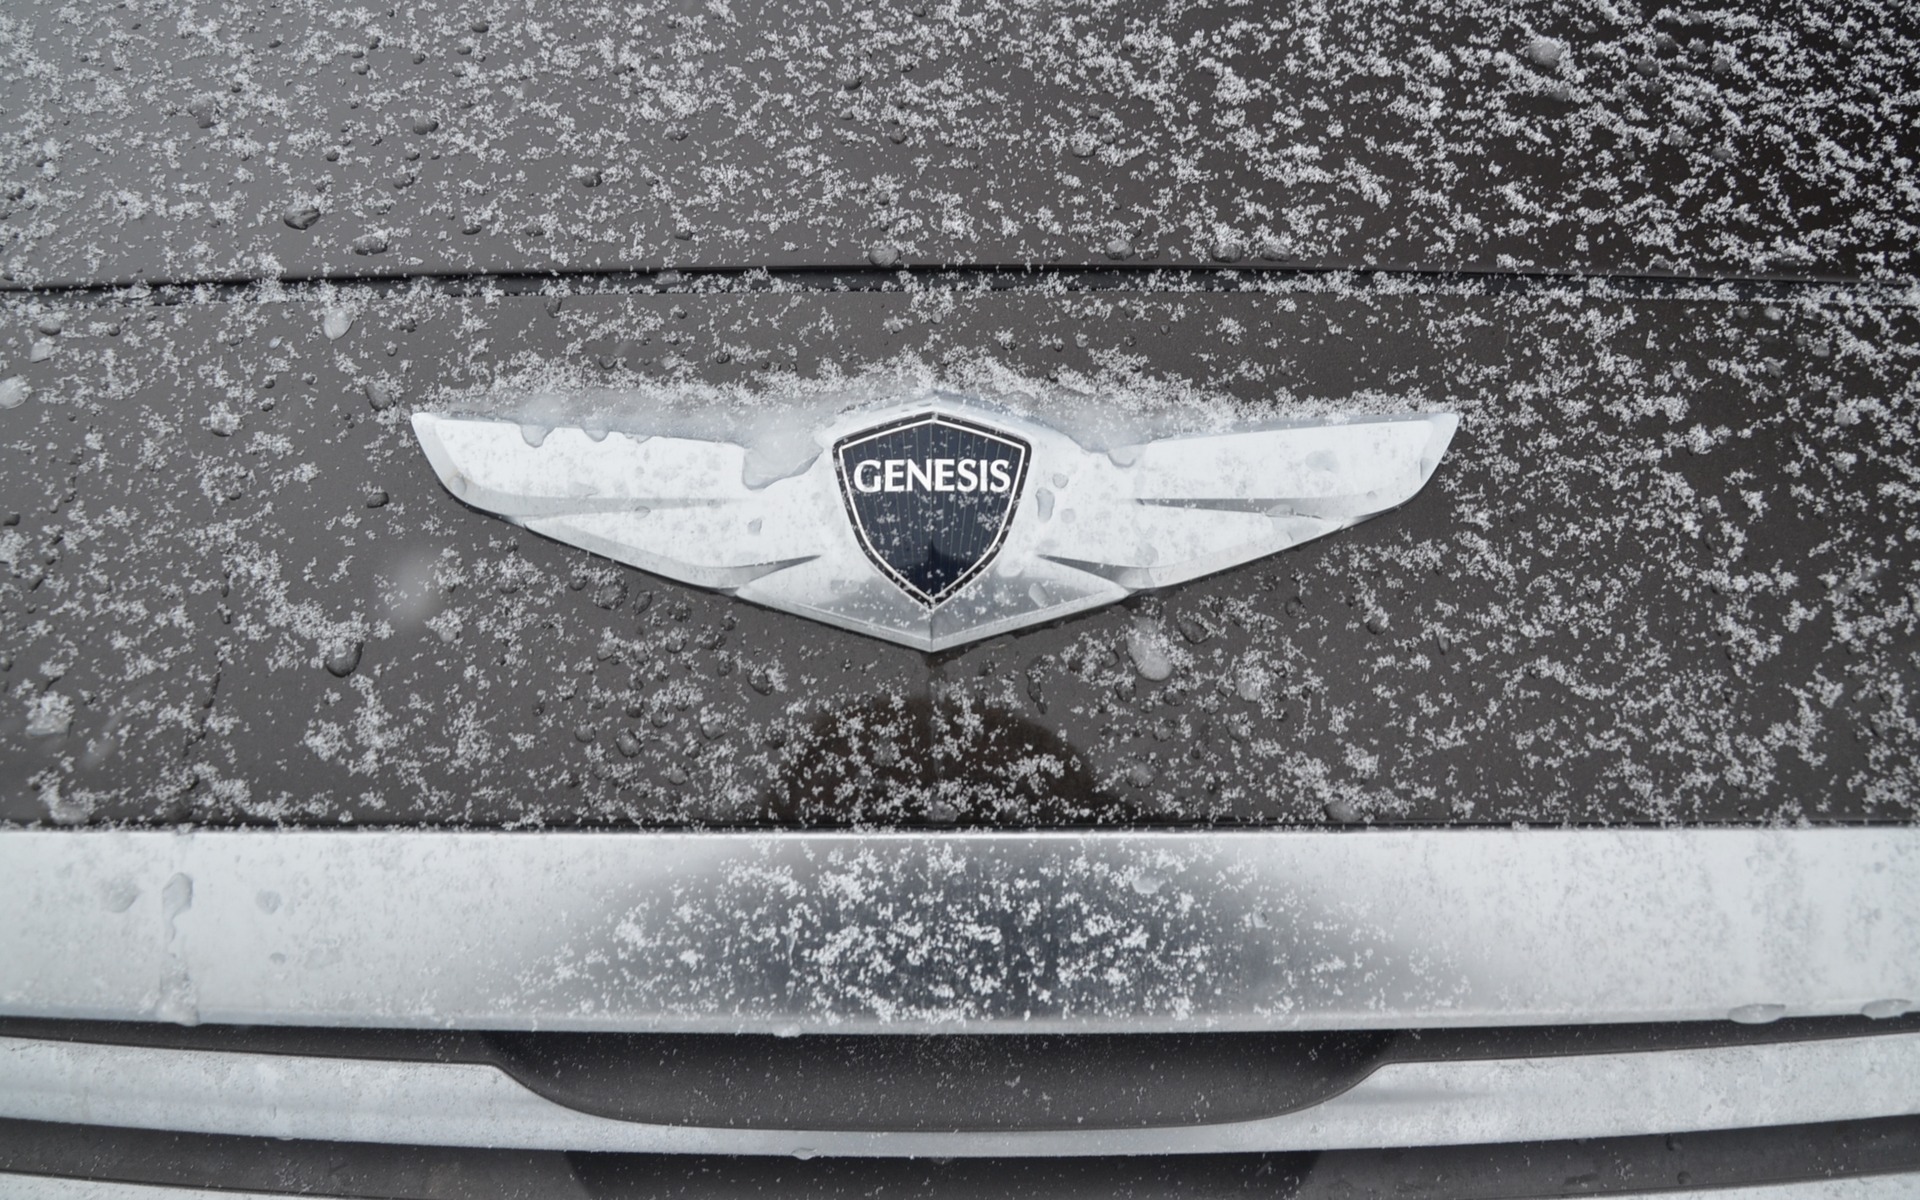 The Genesis logo—and not the Hyundai logo—is up front.